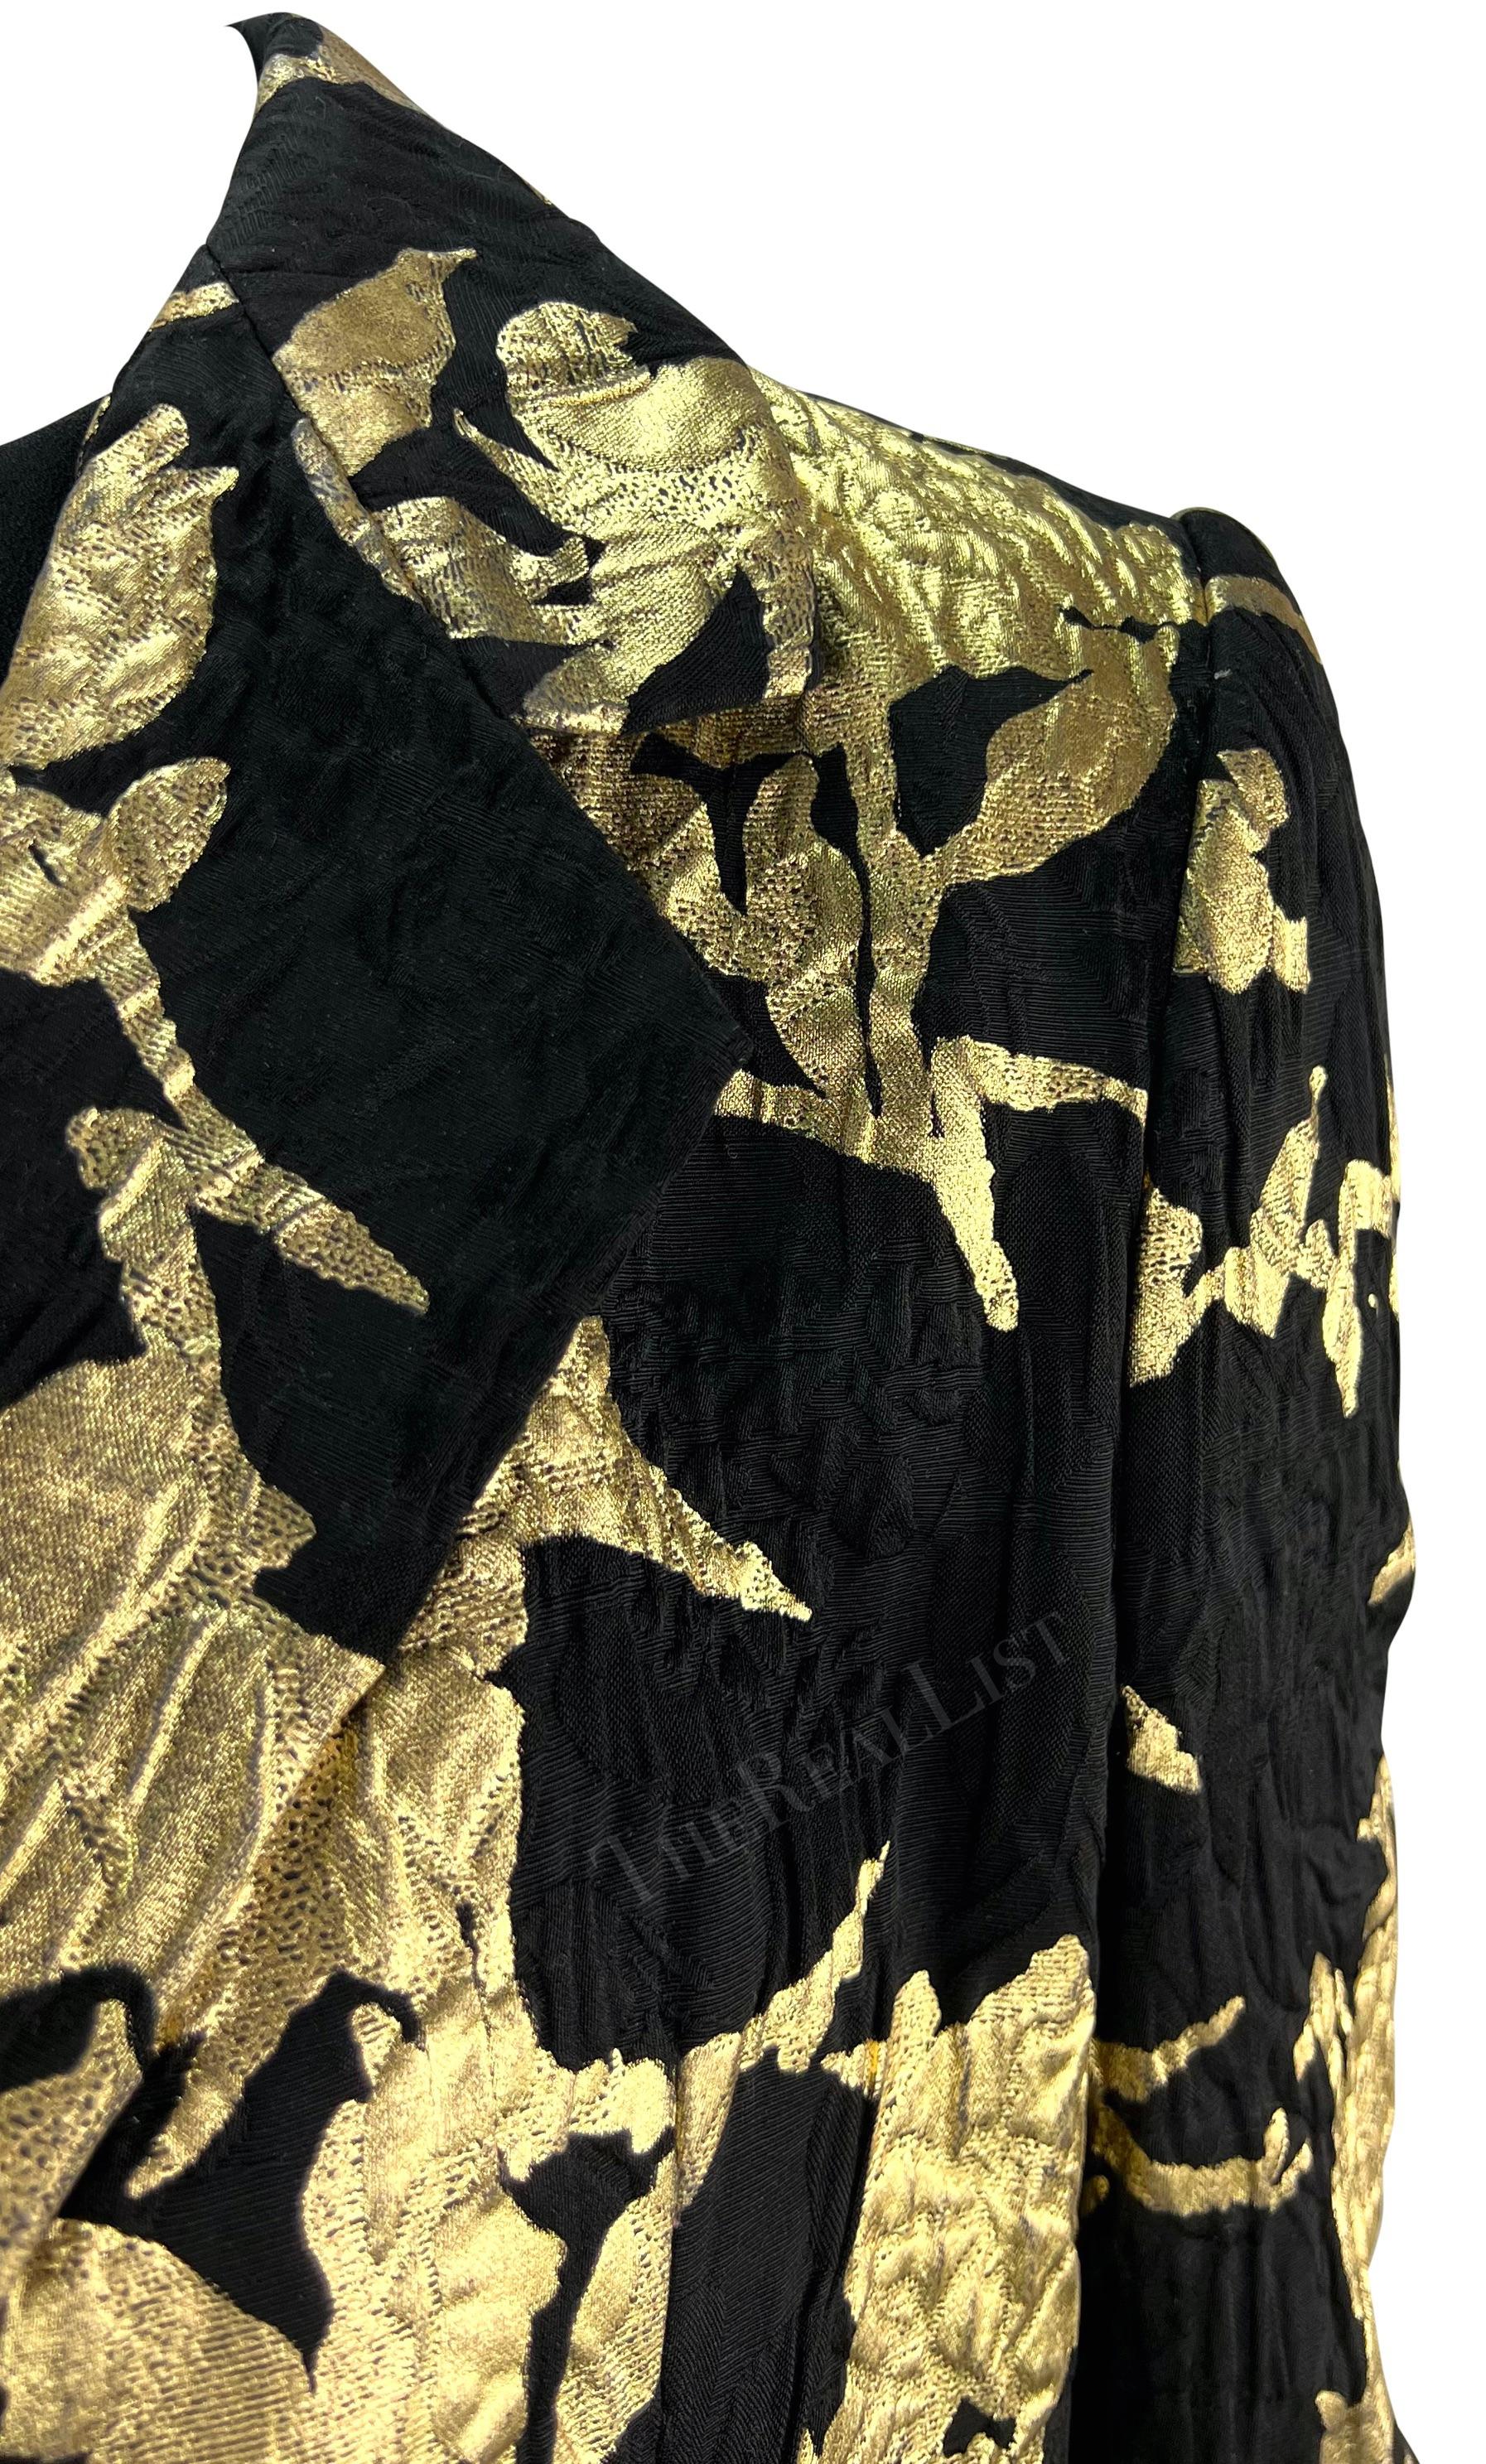 Presenting a fabulous black and gold Christian Dior haute couture dress set, designed by John Galliano. From the Spring/Summer 2006 collection, this set is comprised of a black long-sleeve gown and matching black and gold jacket. The dress features